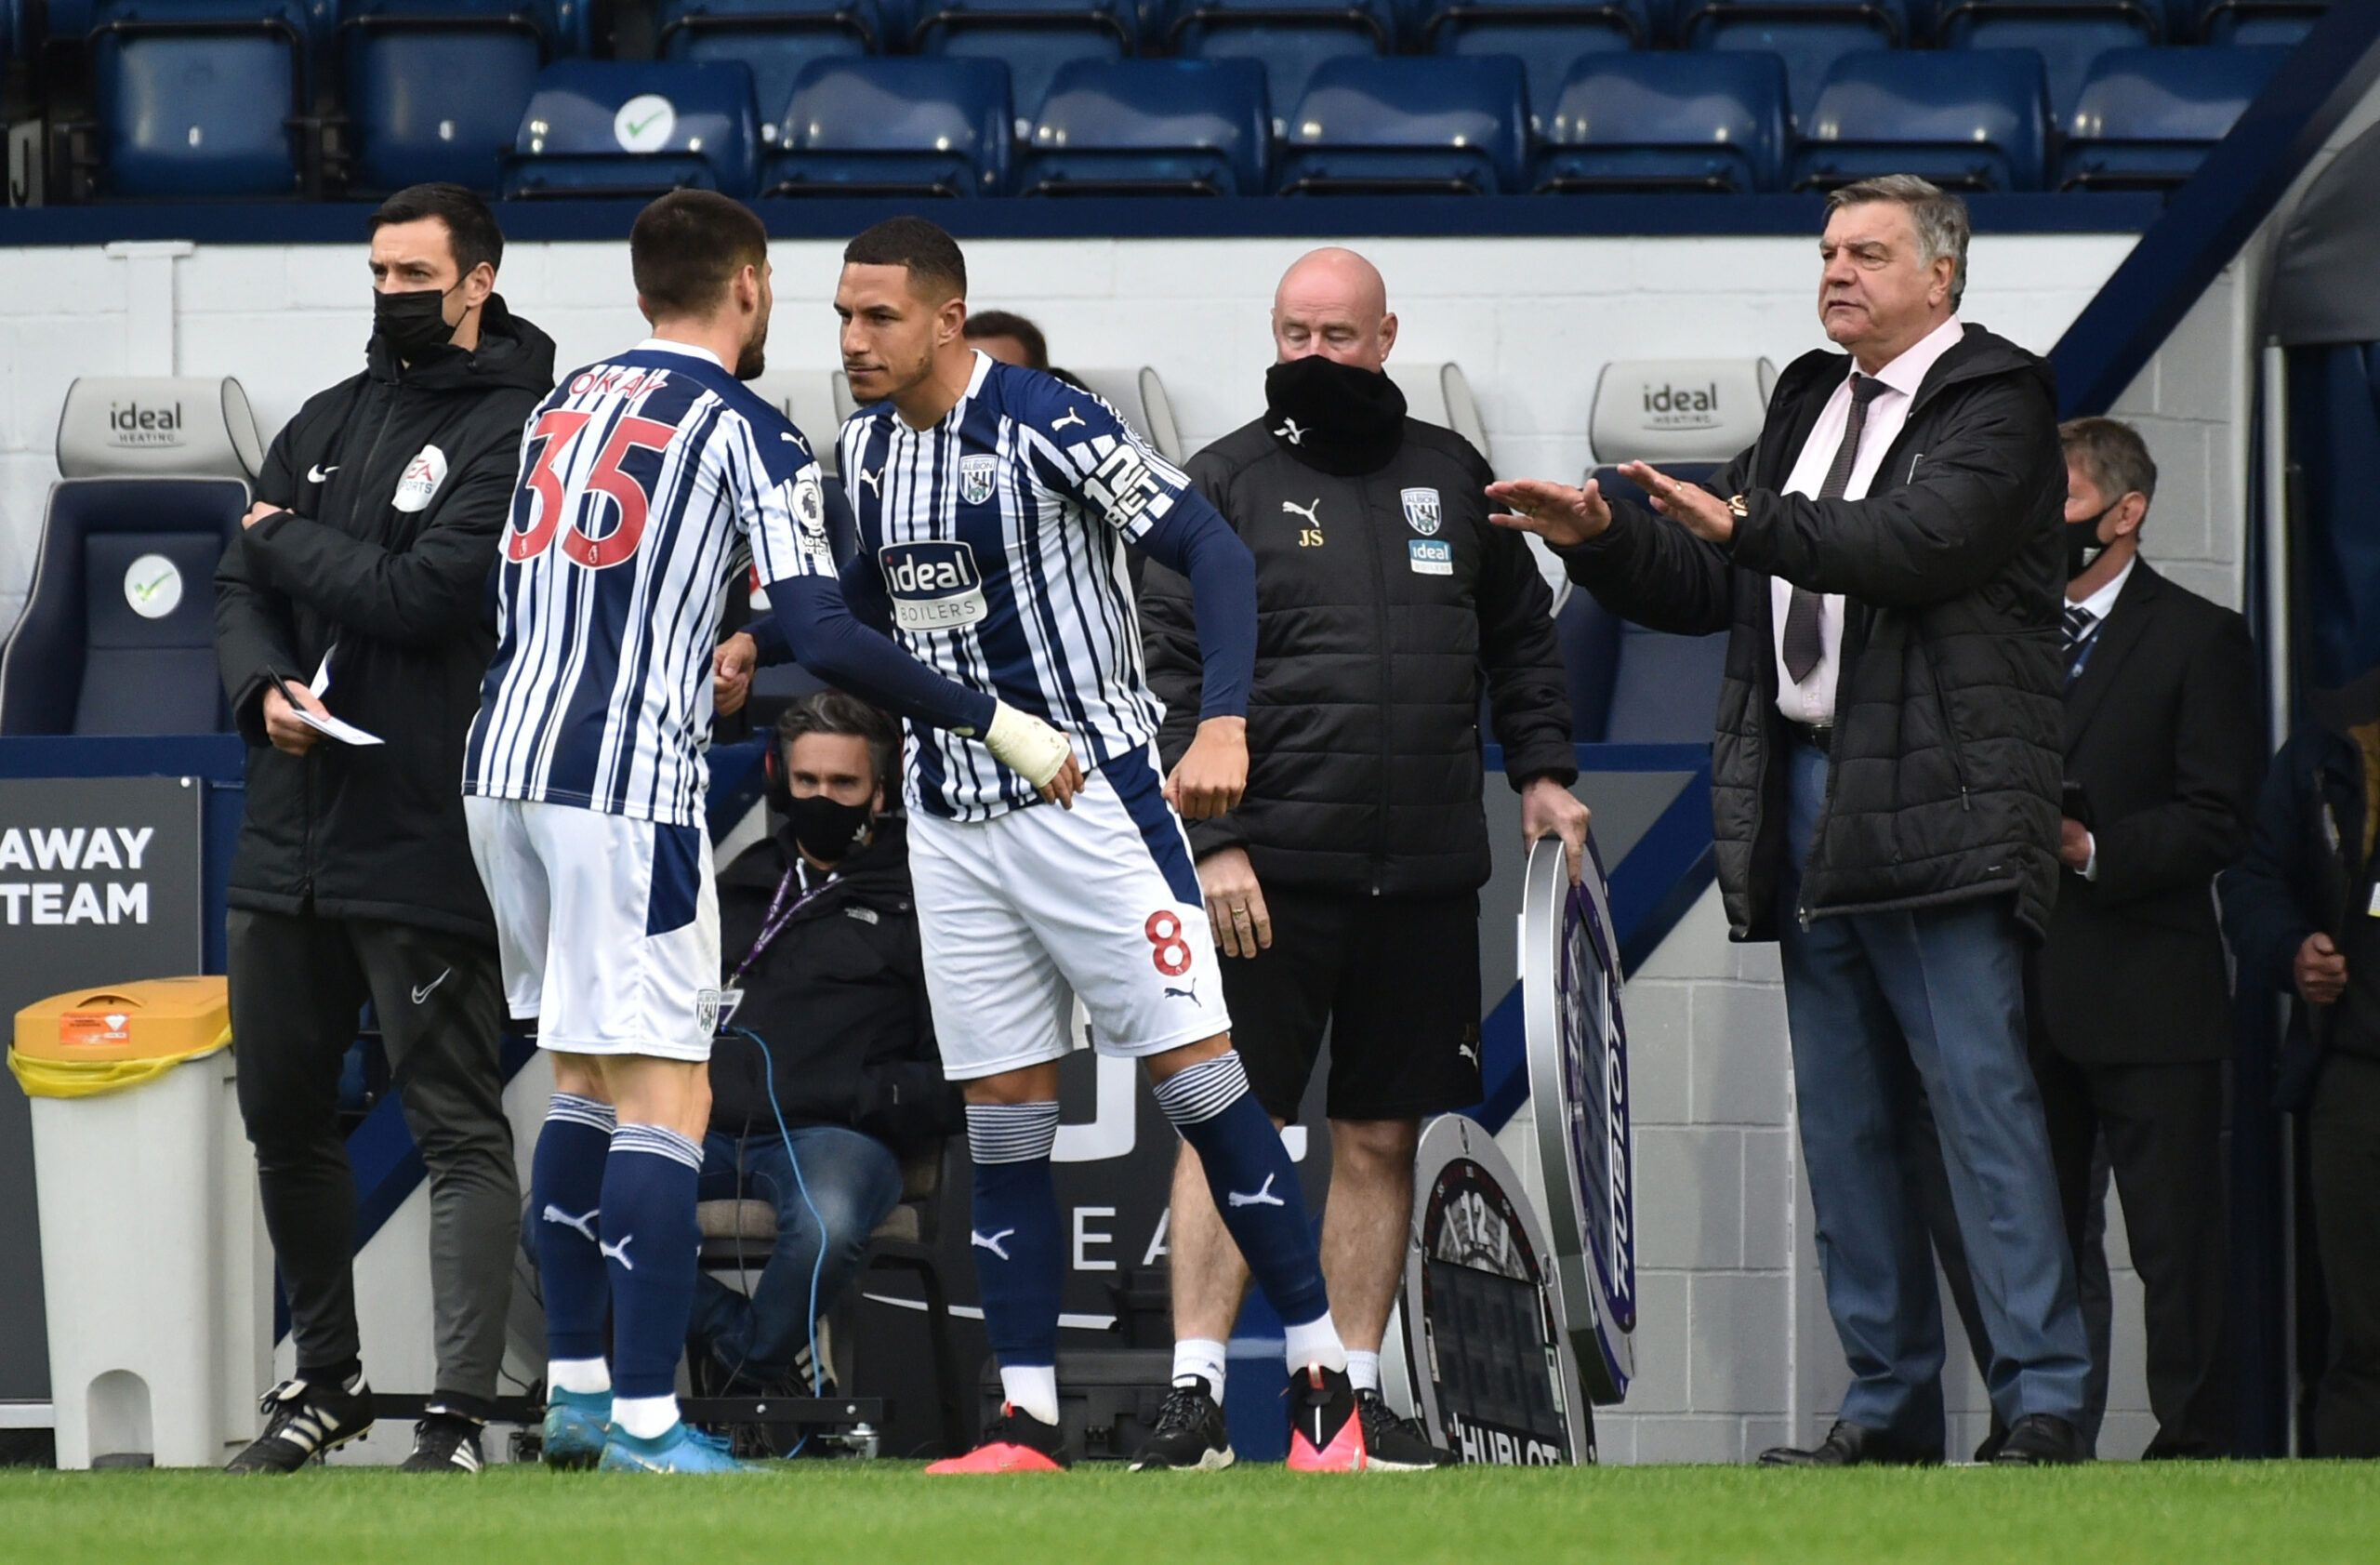 Soccer Football - Premier League - West Bromwich Albion v Liverpool - The Hawthorns, West Bromwich, Britain - May 16, 2021 West Bromwich Albion's Jake Livermore comes on as a substitute to replace Okay Yokuslu as manager Sam Allardyce looks on Pool via REUTERS/Rui Vieira EDITORIAL USE ONLY. No use with unauthorized audio, video, data, fixture lists, club/league logos or 'live' services. Online in-match use limited to 75 images, no video emulation. No use in betting, games or single club /league/